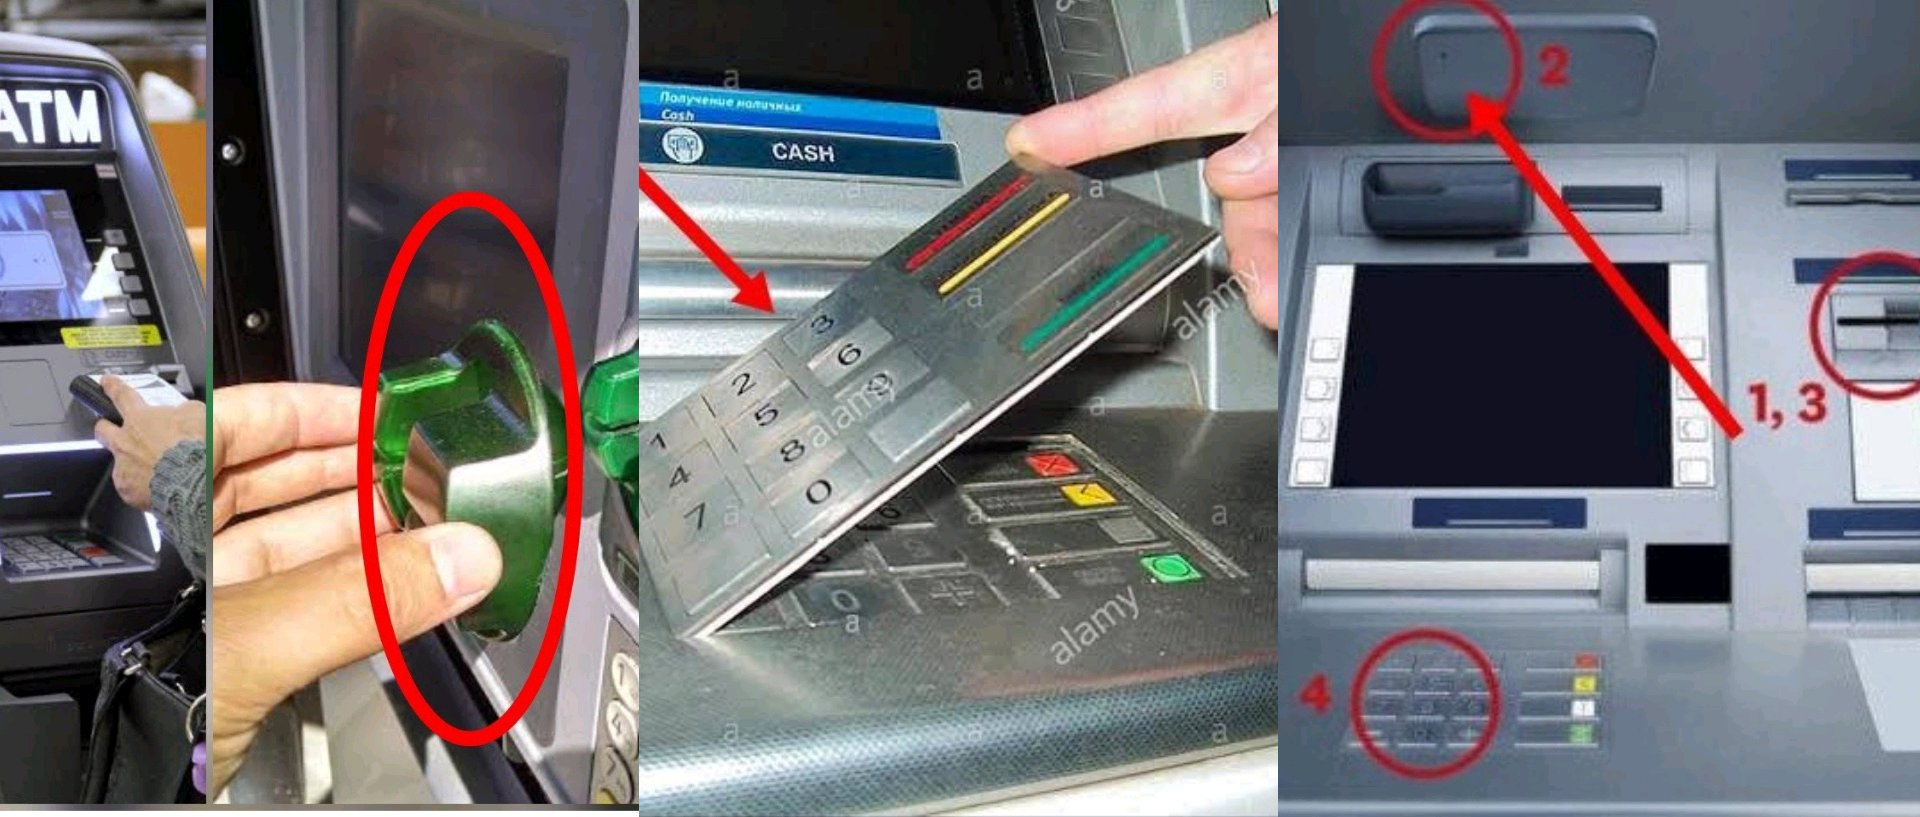 Don’t Insert Your ATM Card If You Notice These 3 Things In Any ATM Machine